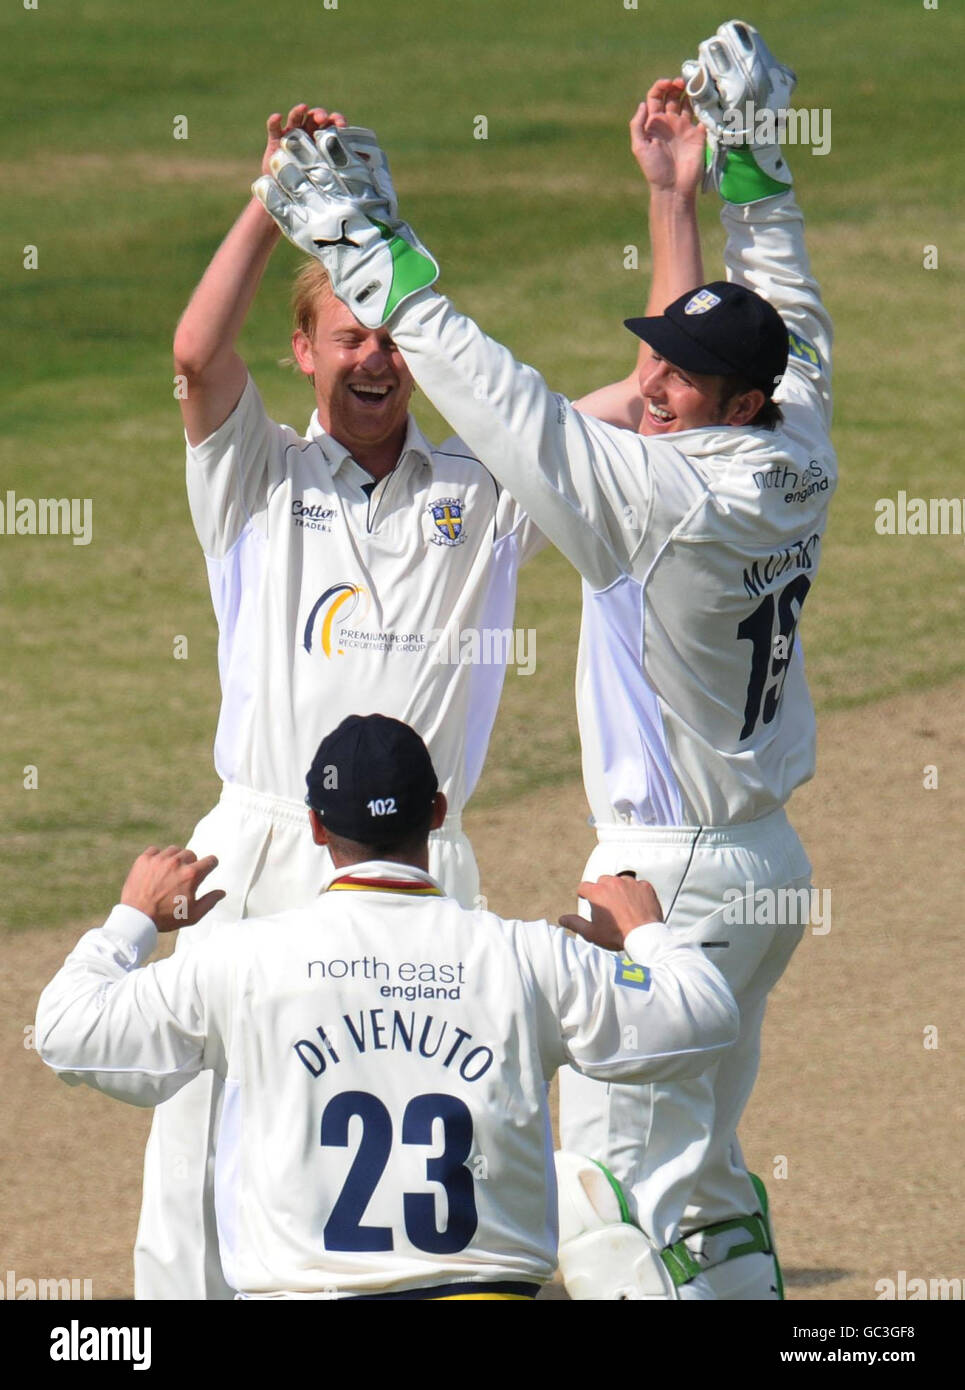 Durham's Mark Davies celebrates the wicket of Nottinghamshire's batsman Ali Brown during the LV County Championship match at the County Ground, Chester-le-Street. Stock Photo